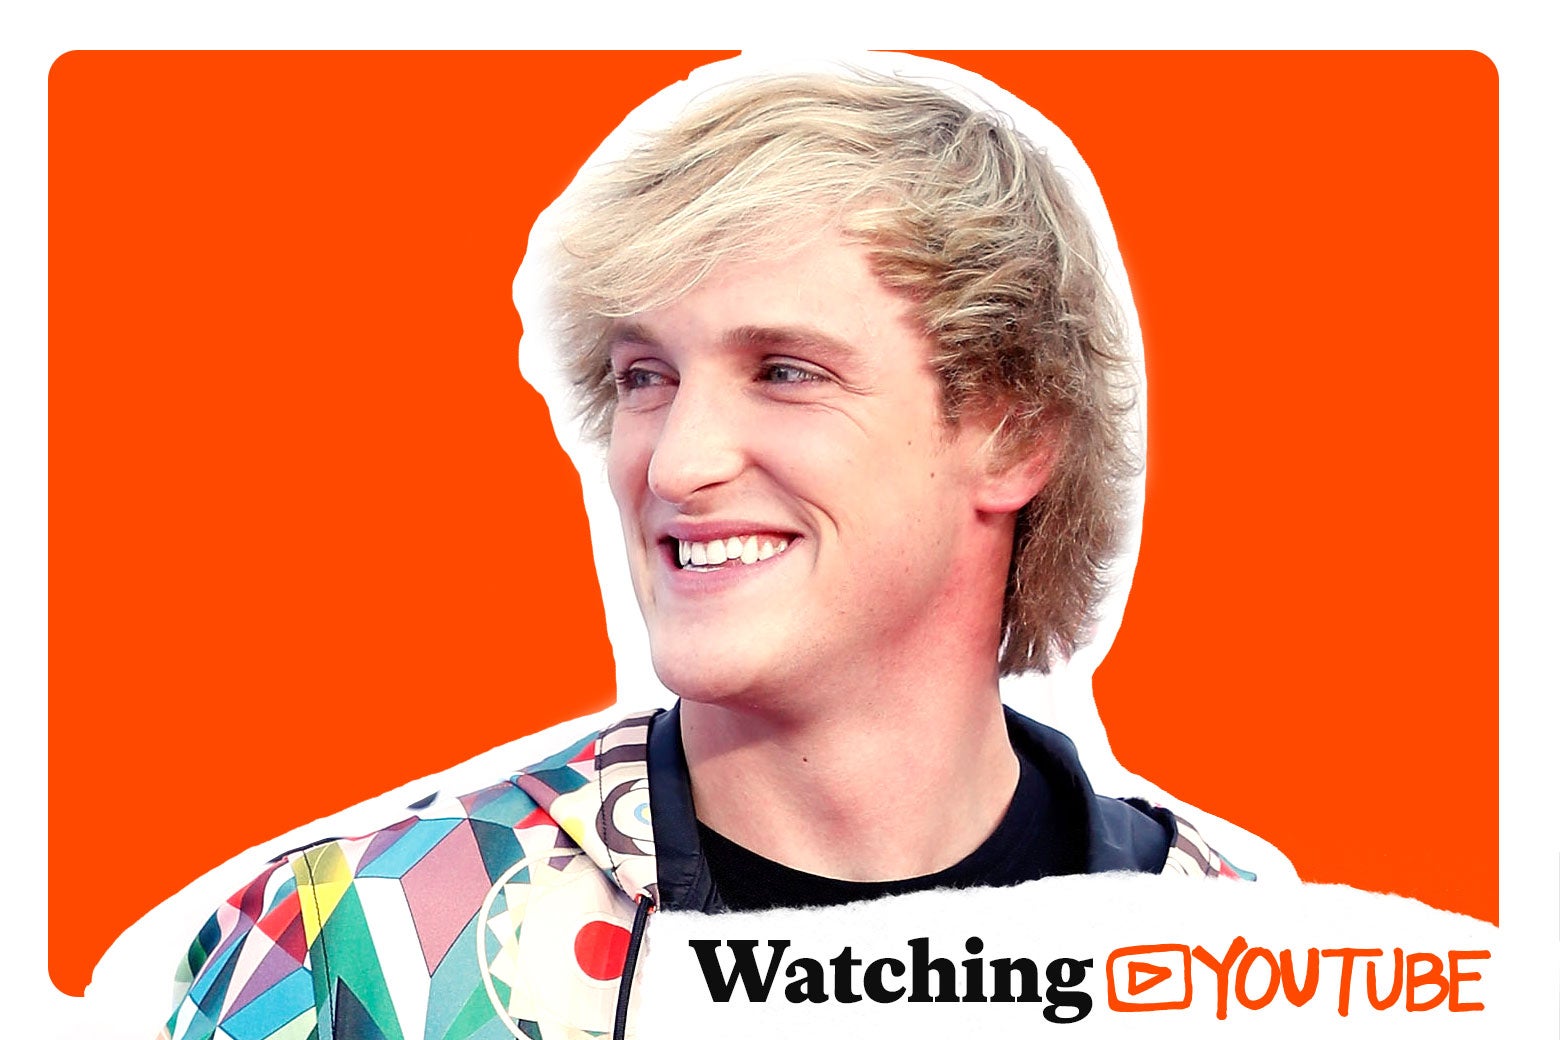 Logan Paul, with a logo for "Watching YouTube."